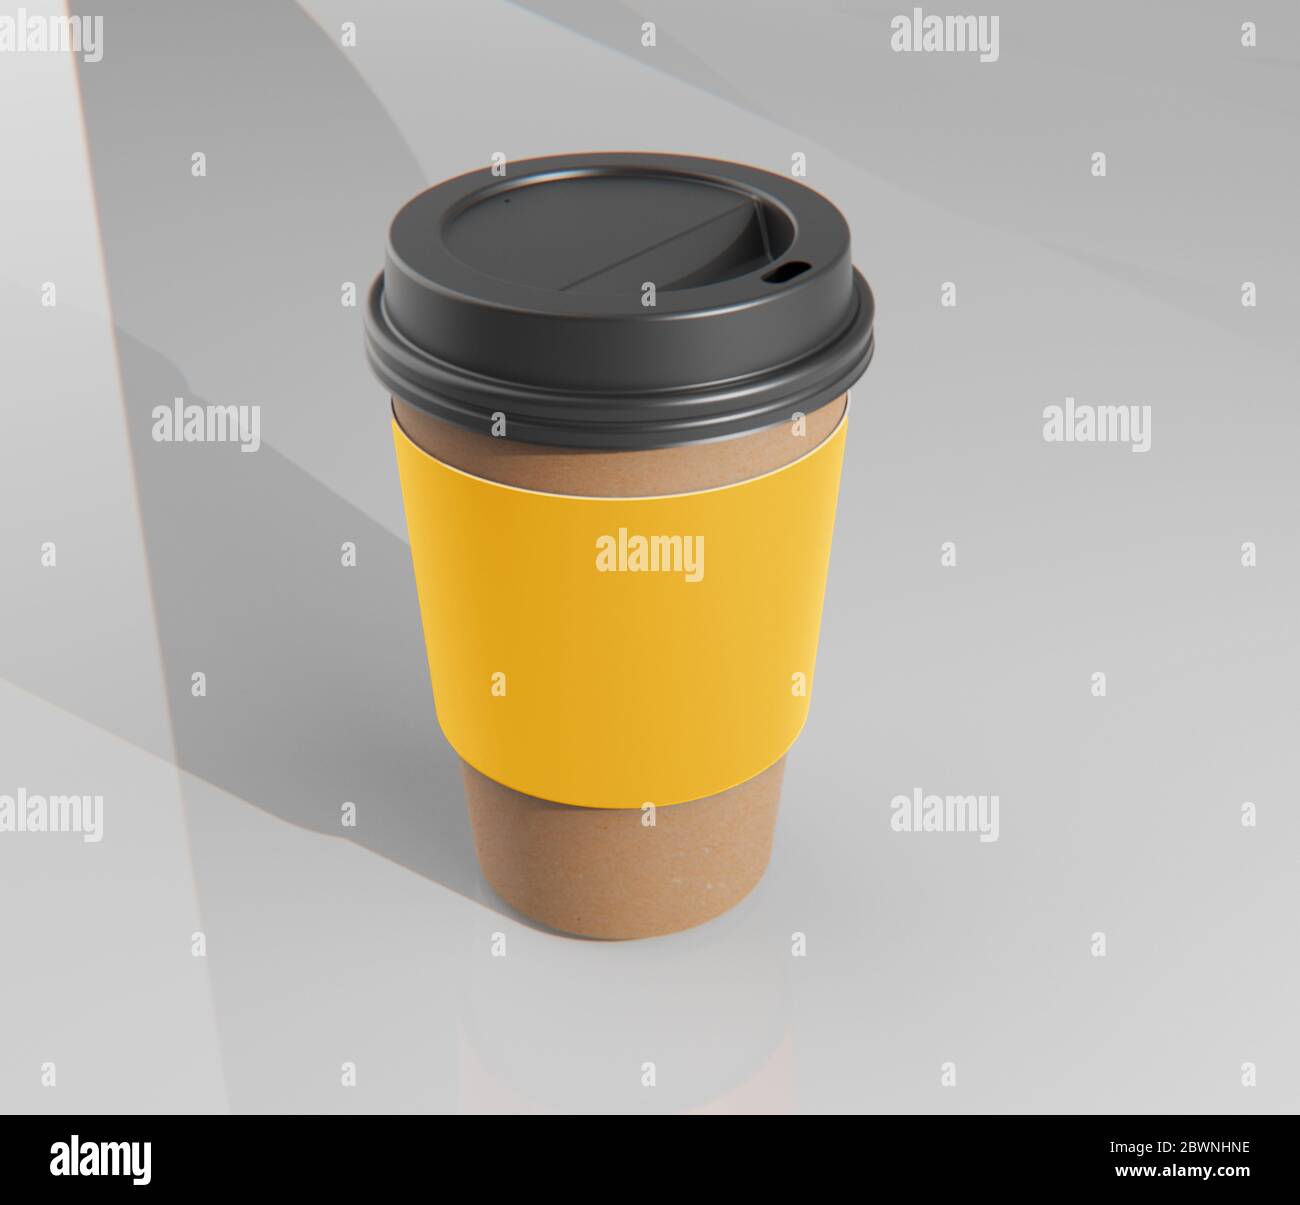 Download Paper Coffee Cup Mockup 10 Coffee Cup Mockups Free Psd Vector Jpeg Format PSD Mockup Templates